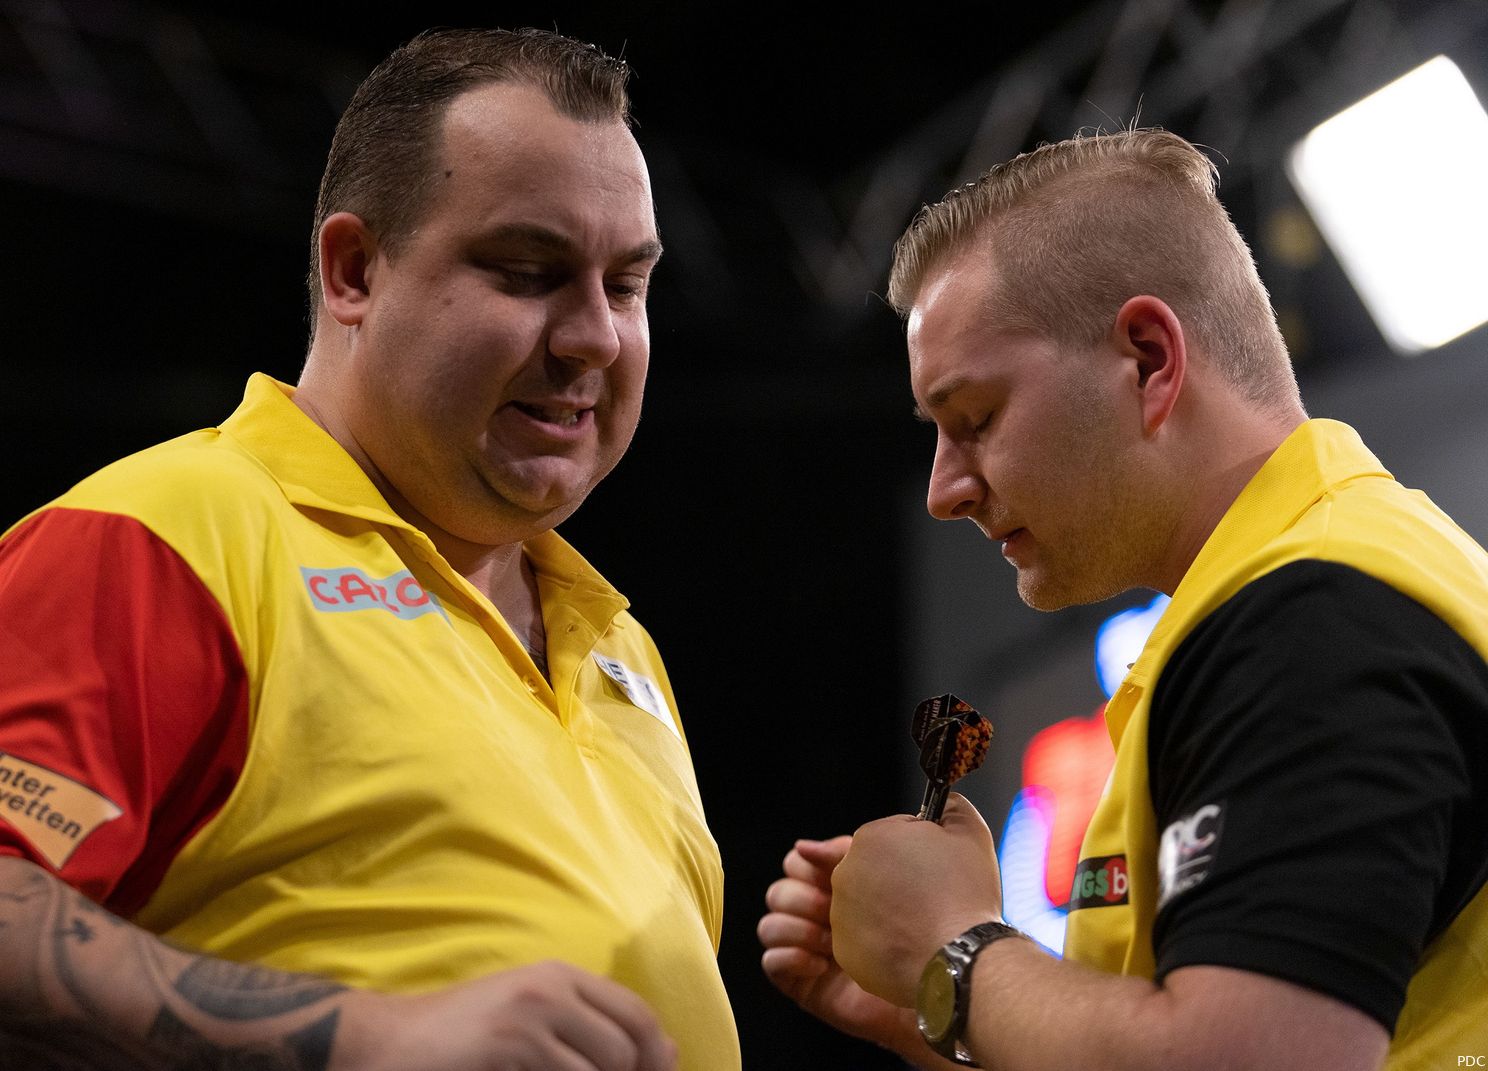 "I would rather make my debut in a different way" - Mike De Decker wants to earn World Cup of Darts spot not be gifted due to Huybrechts injury